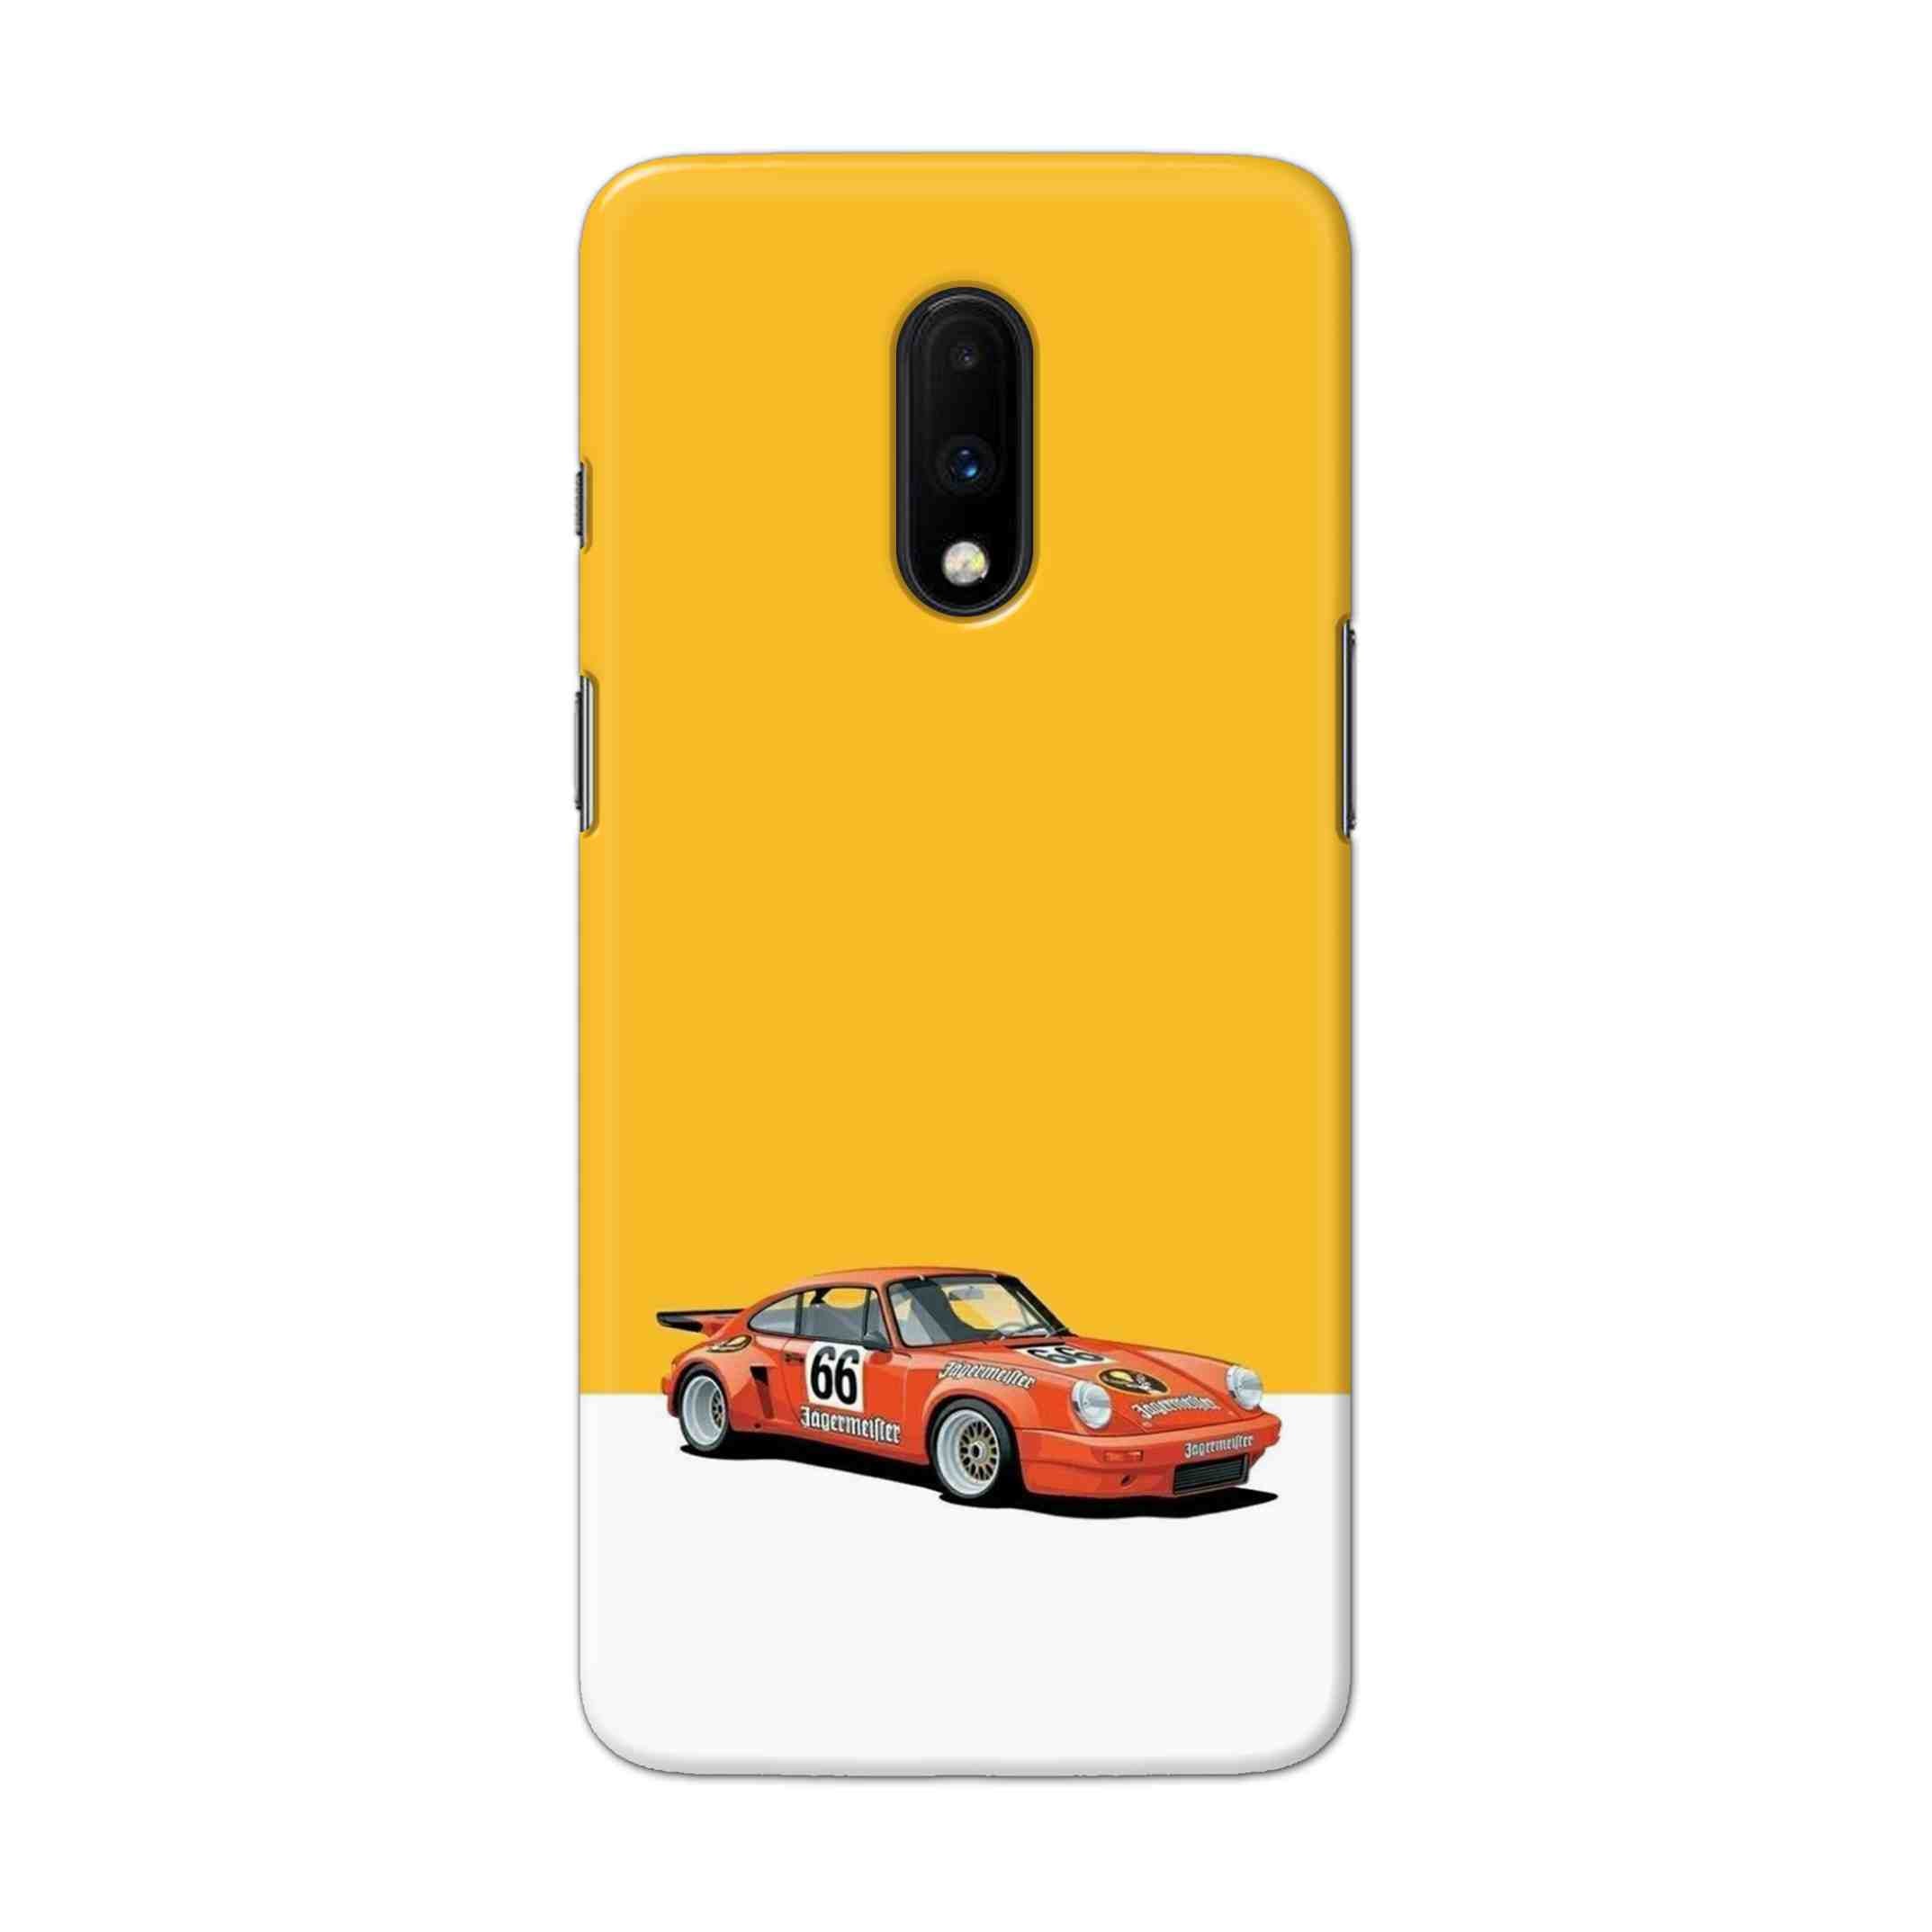 Buy Porche Hard Back Mobile Phone Case Cover For OnePlus 7 Online